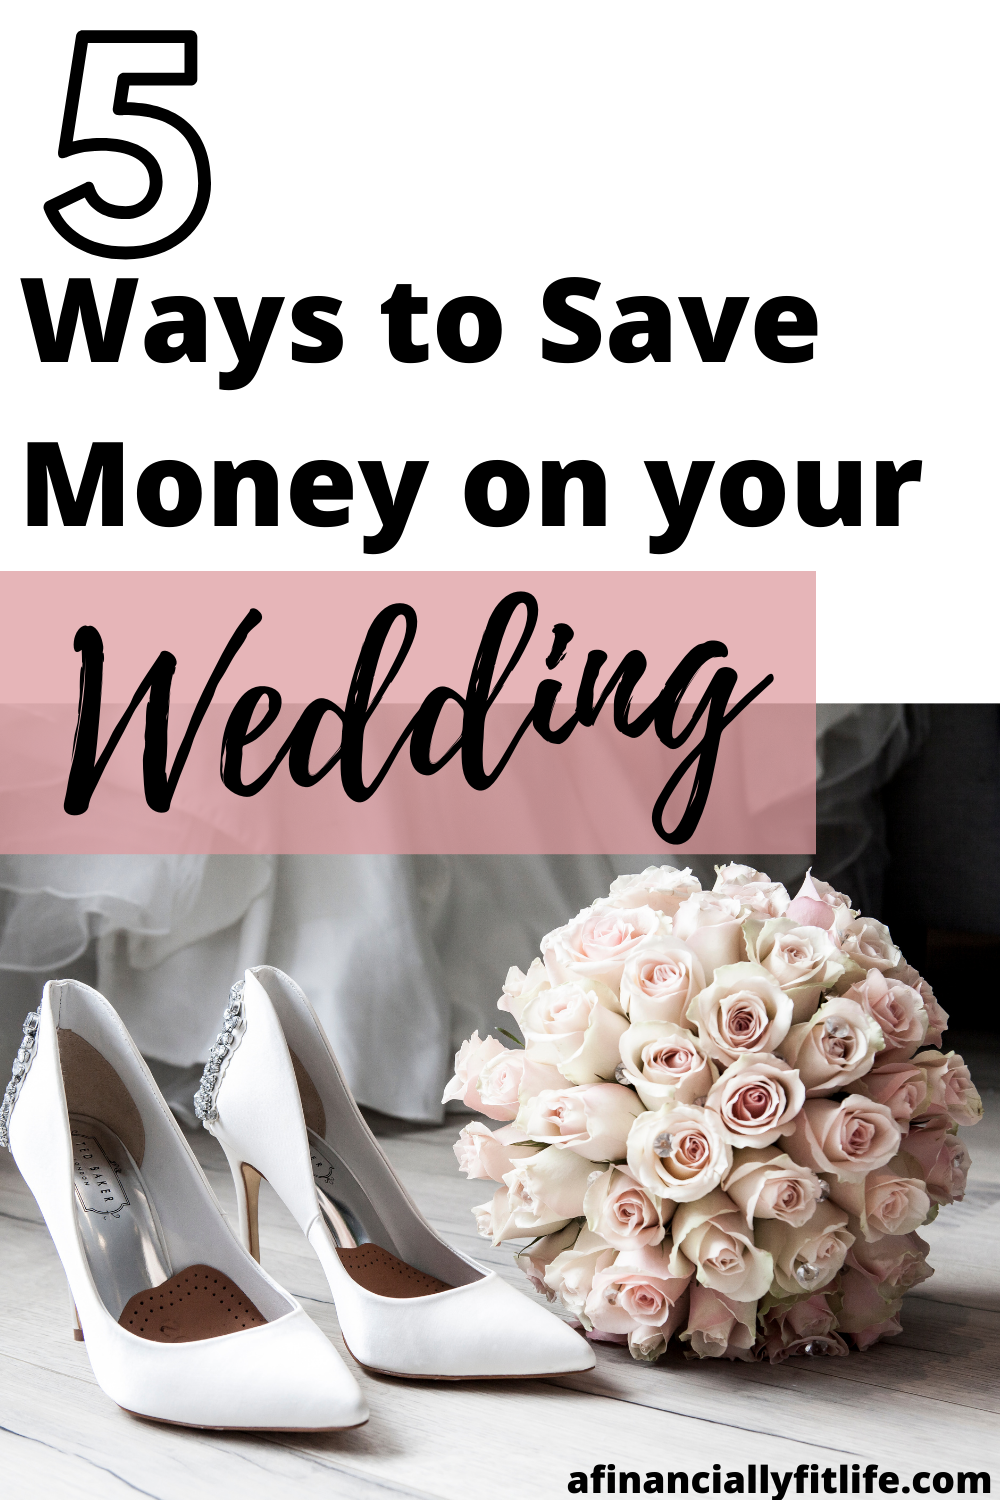 5 Ways to Save Money on Your Wedding Day - AFinanciallyFitLife